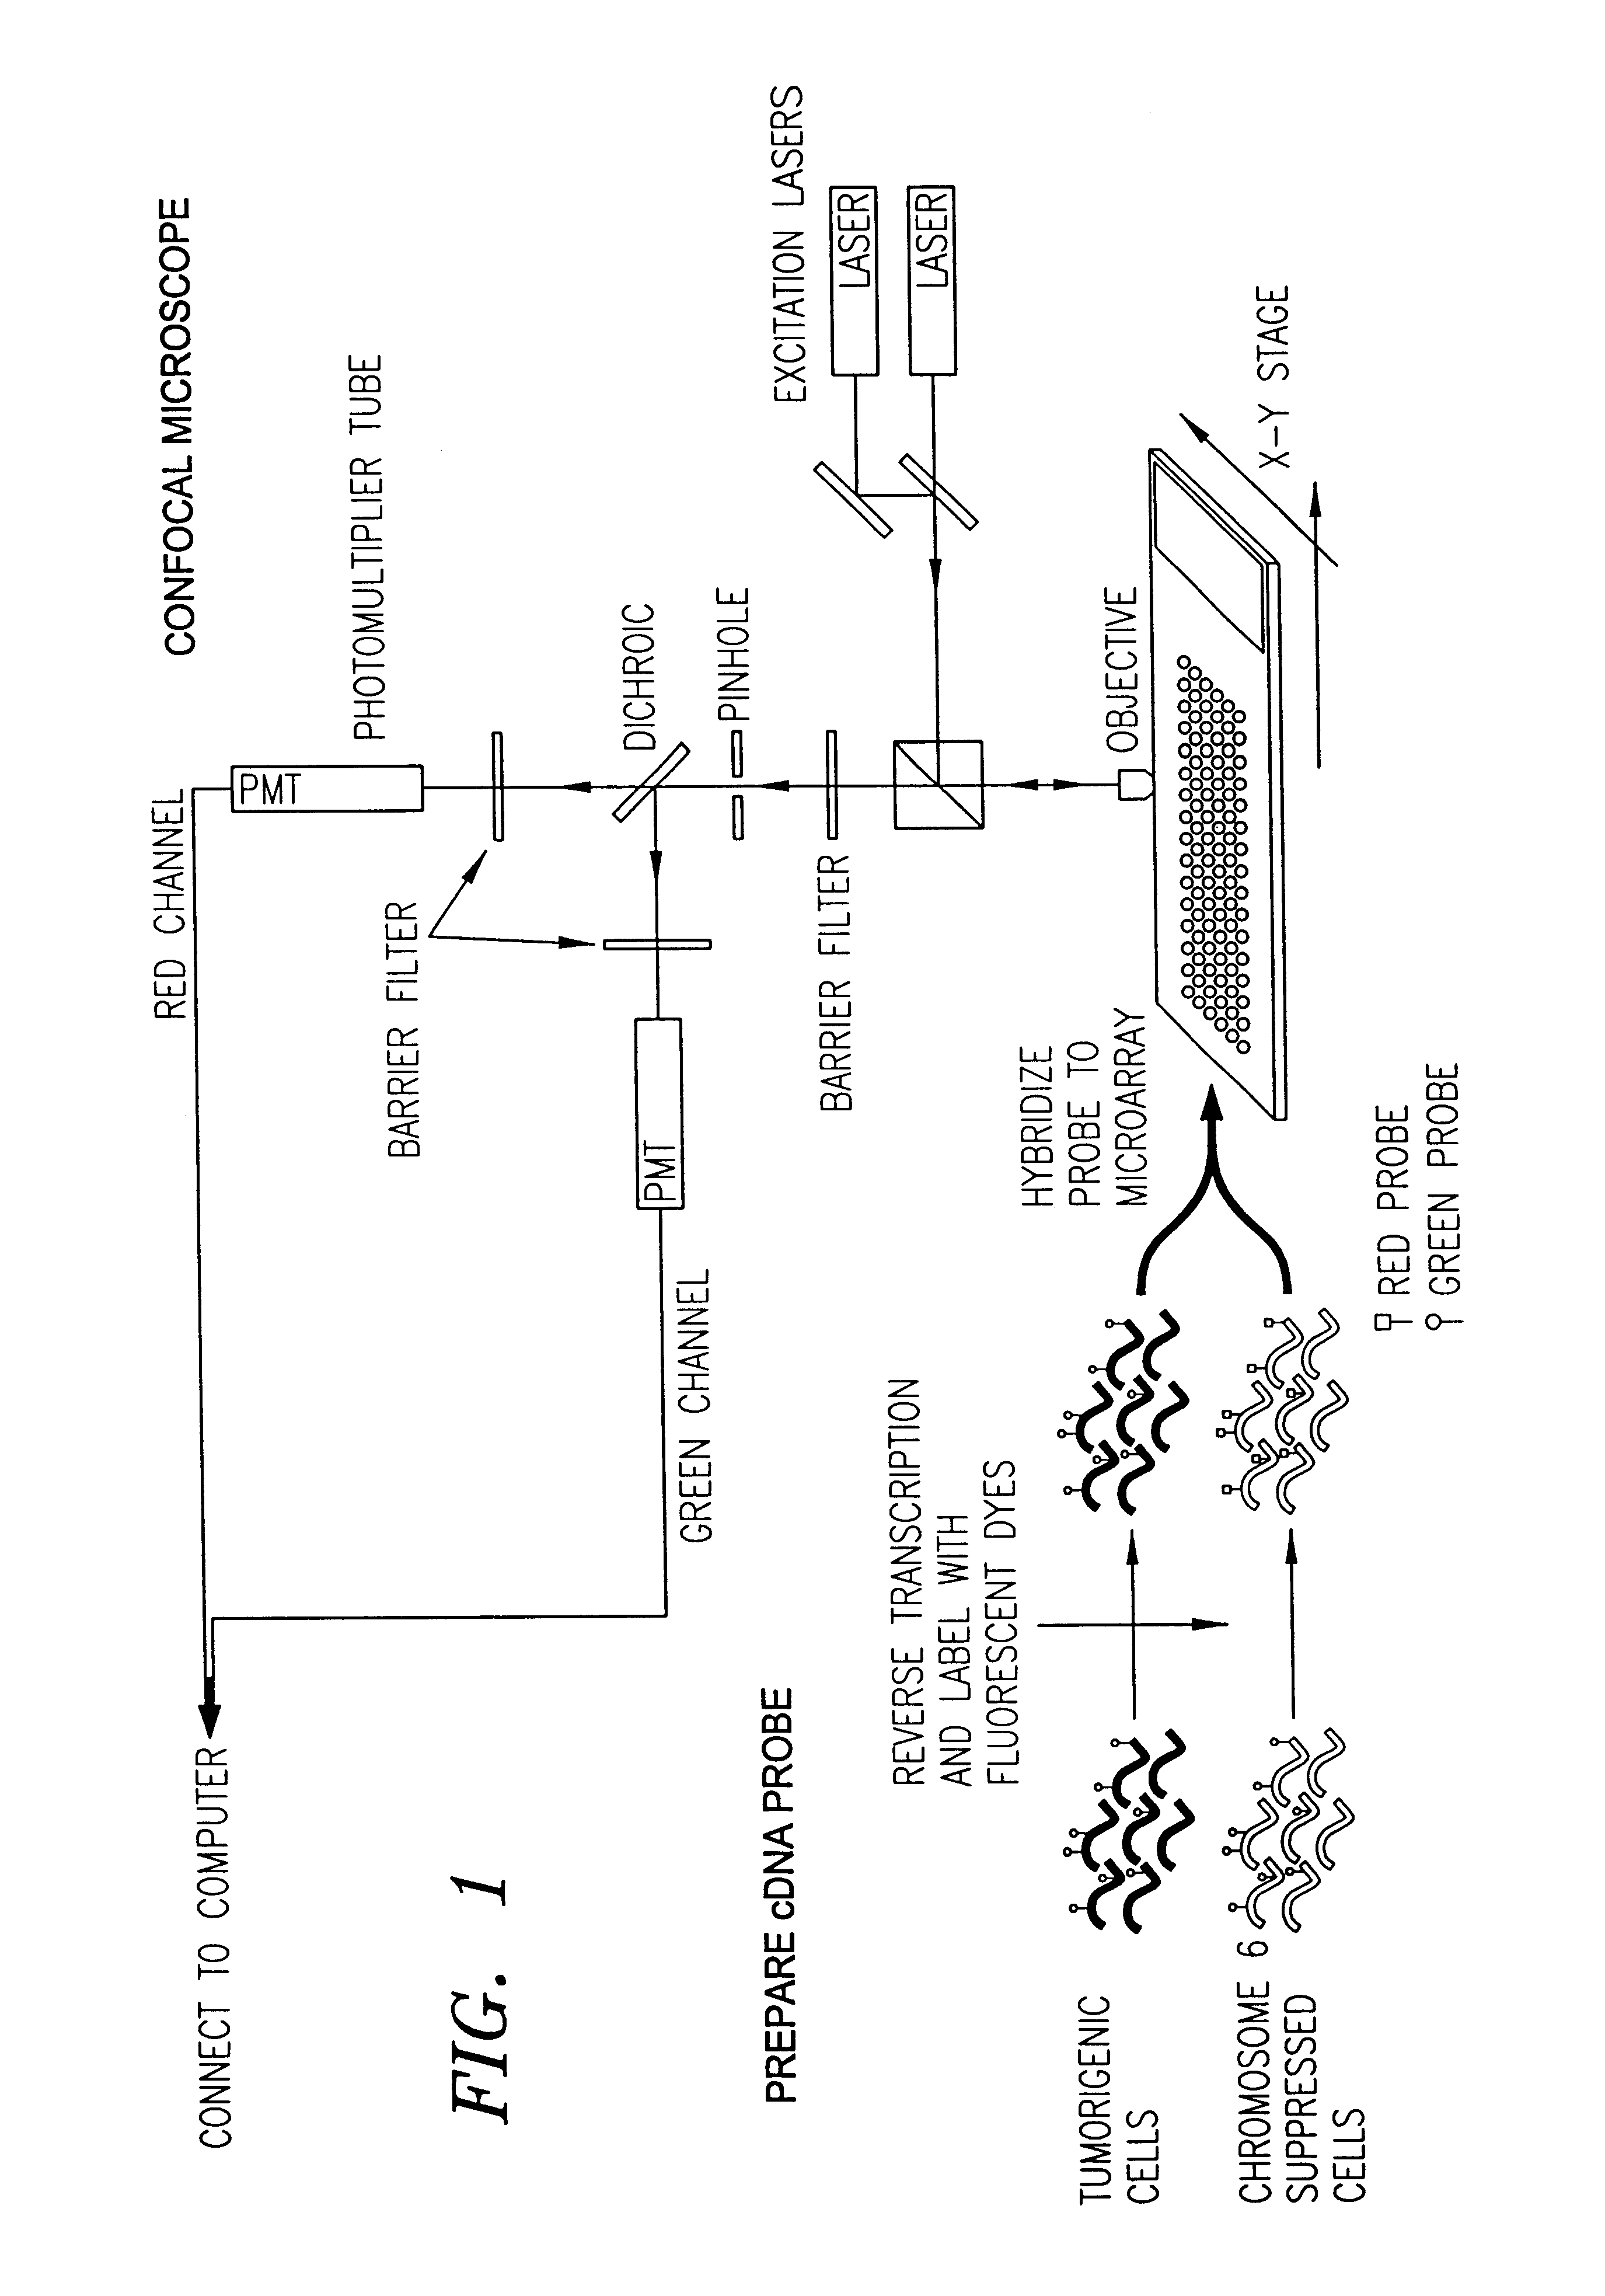 System and method for automatically identifying sub-grids in a microarray